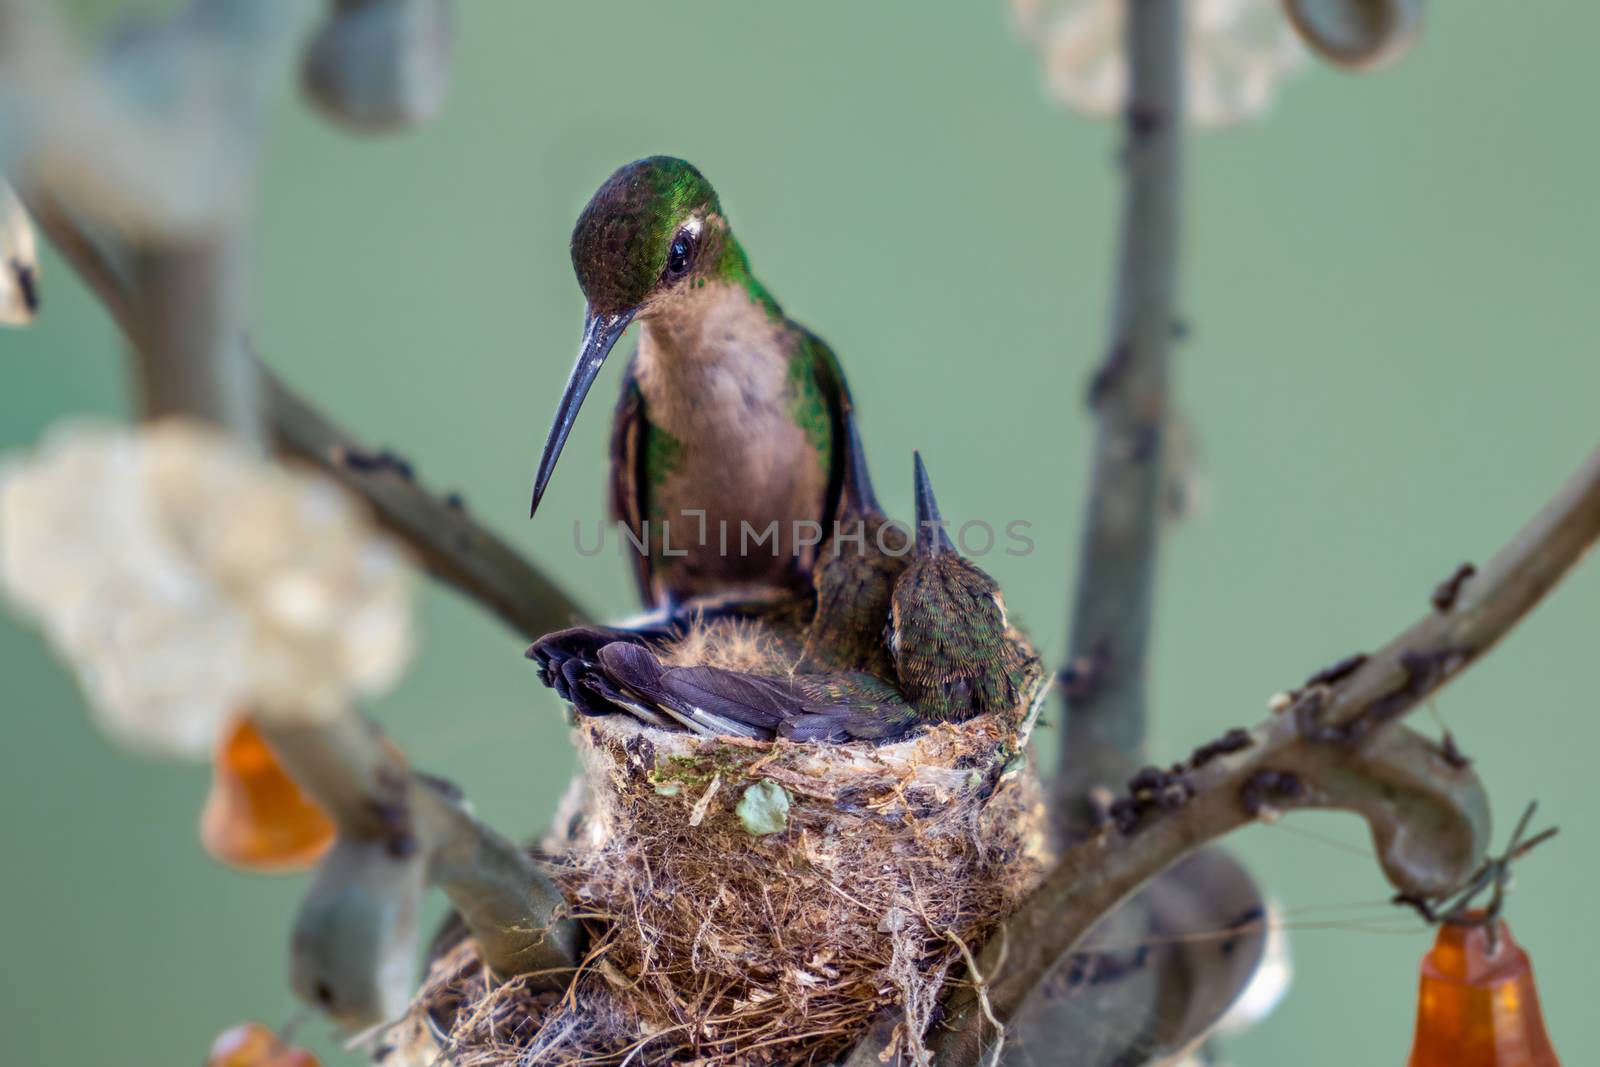 Hummingbird with its nestlings by jrivalta